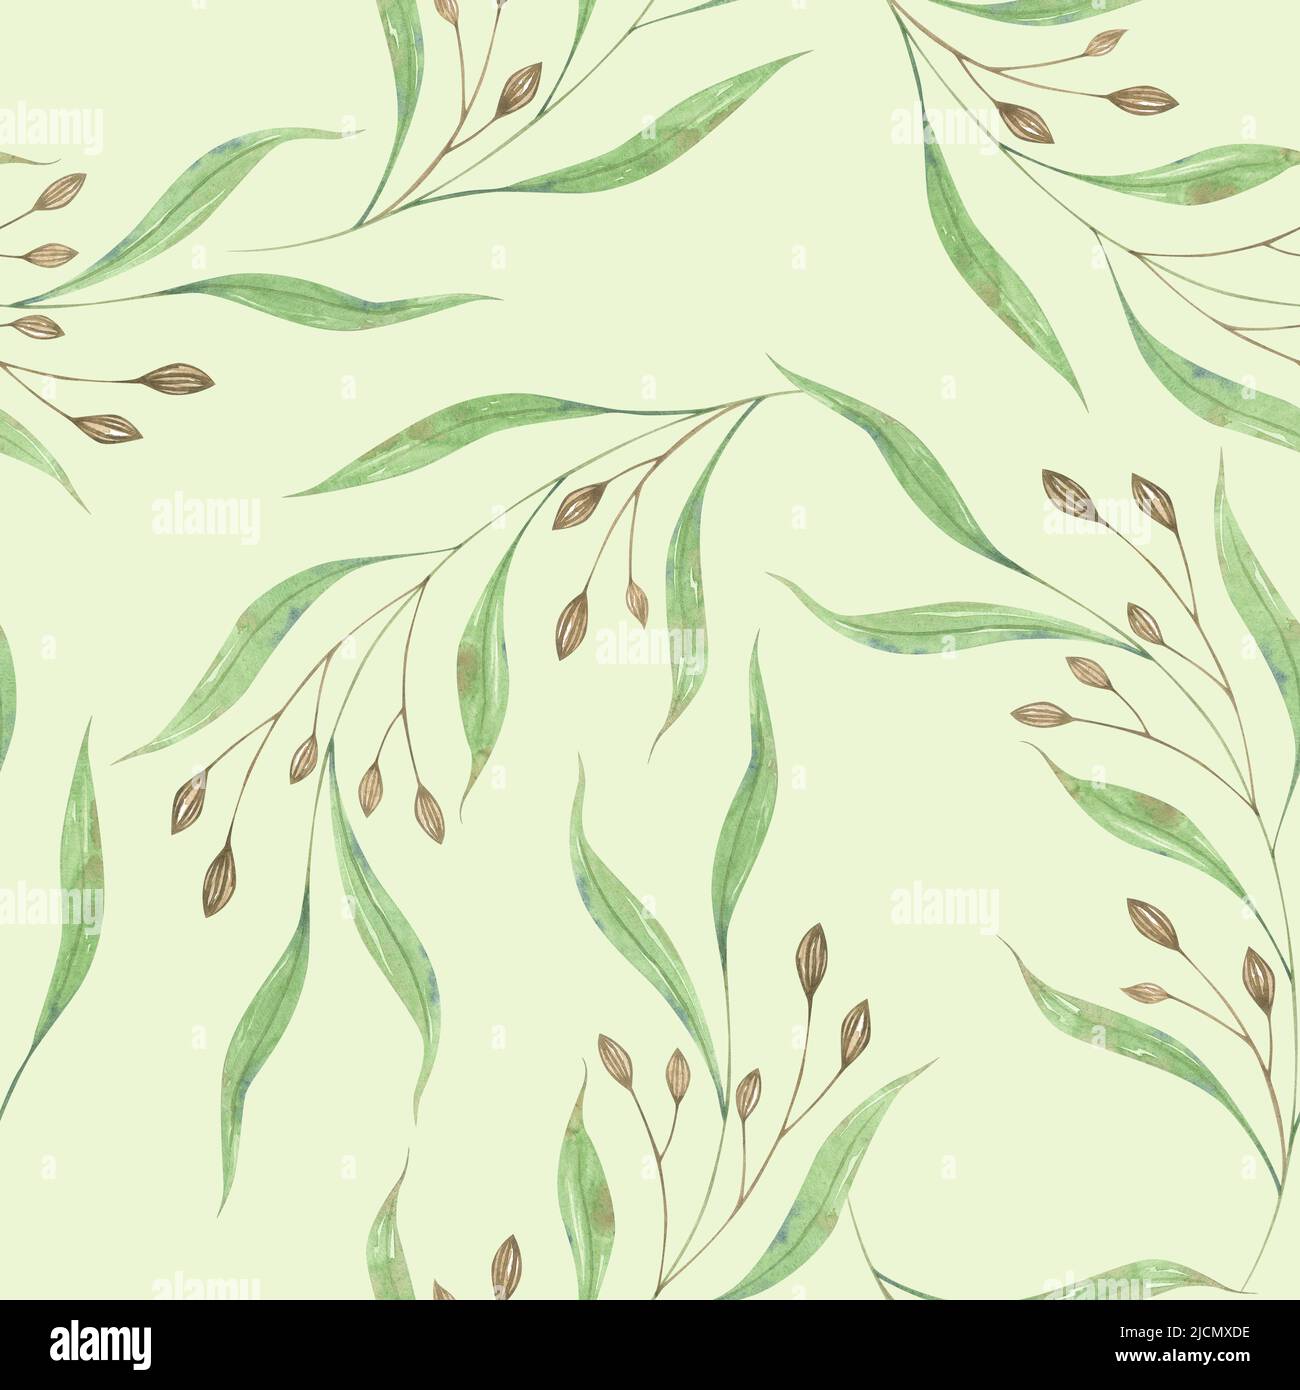 Wild herbs with seeds. Watercolor plants. Green leaves and brown seeds. Seamless pattern on light background. Illustration for fabrics, wallpaper, pri Stock Photo